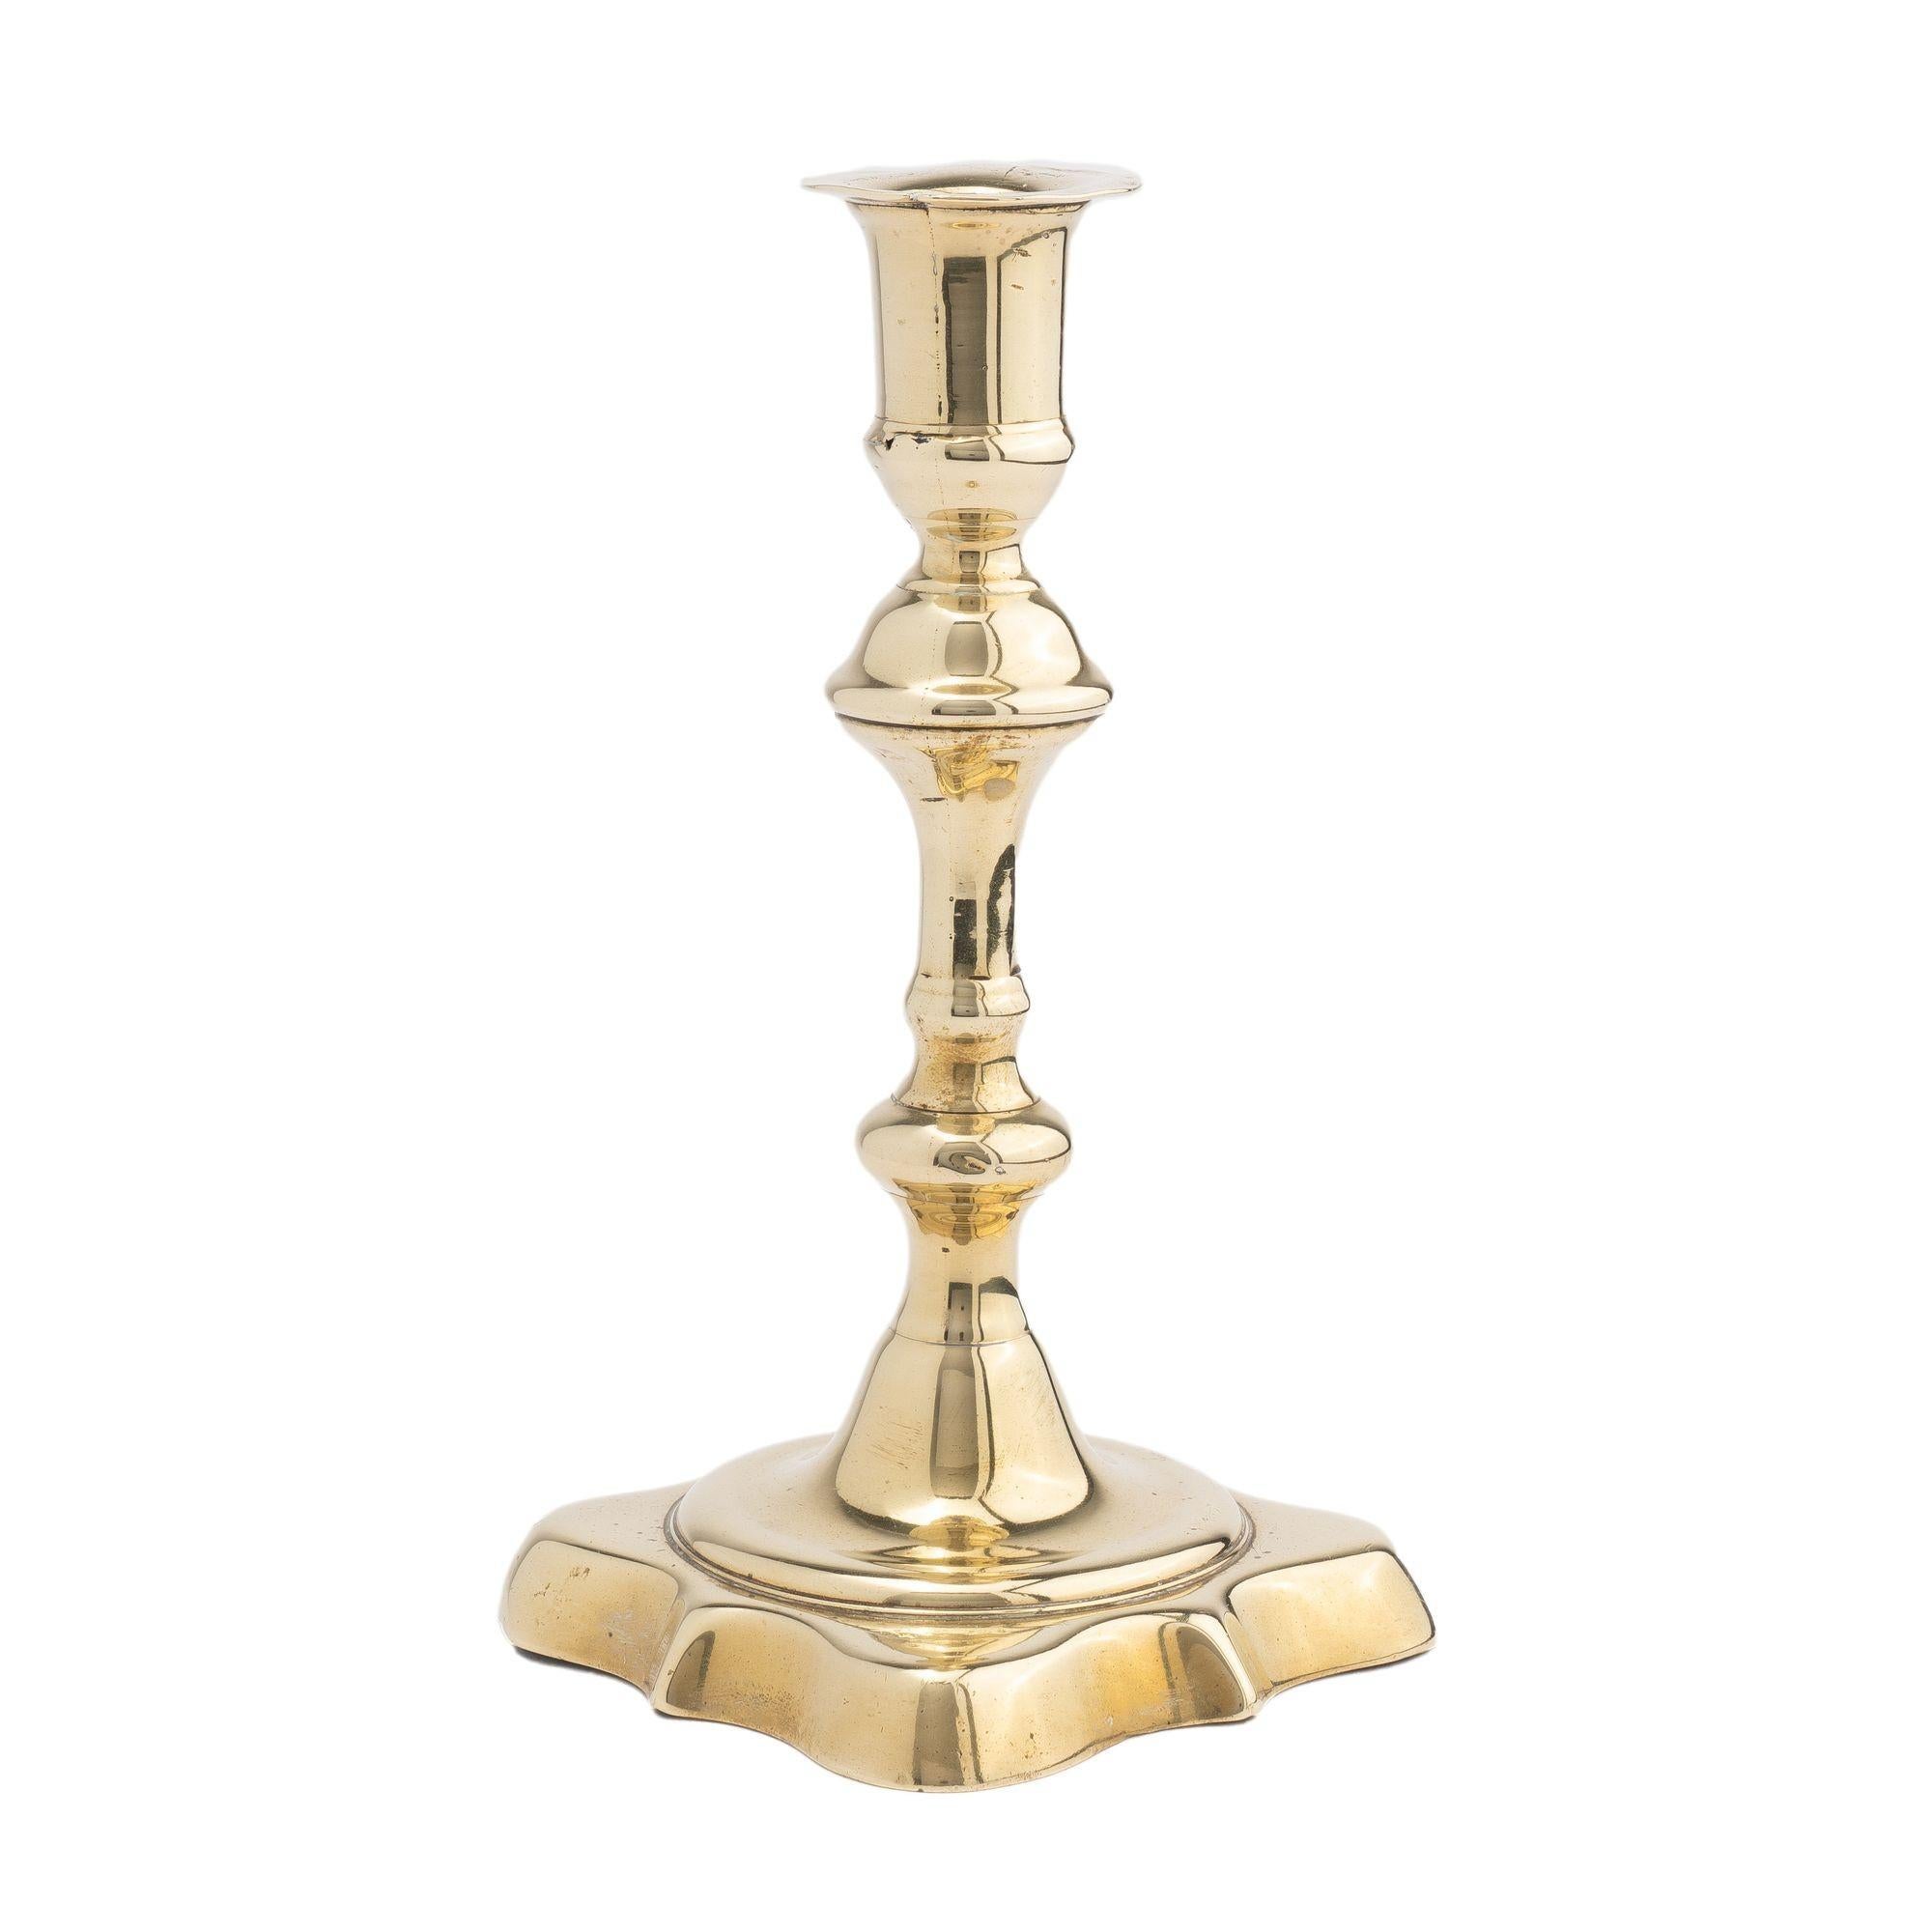 Queen Anne candlestick with shaft cast in two parts cast with the bobeshe and knob below the candle cup and a secondary knob above the base. The base was cast separately and peened to the assembled shaft. The raised lobed base is defined by a